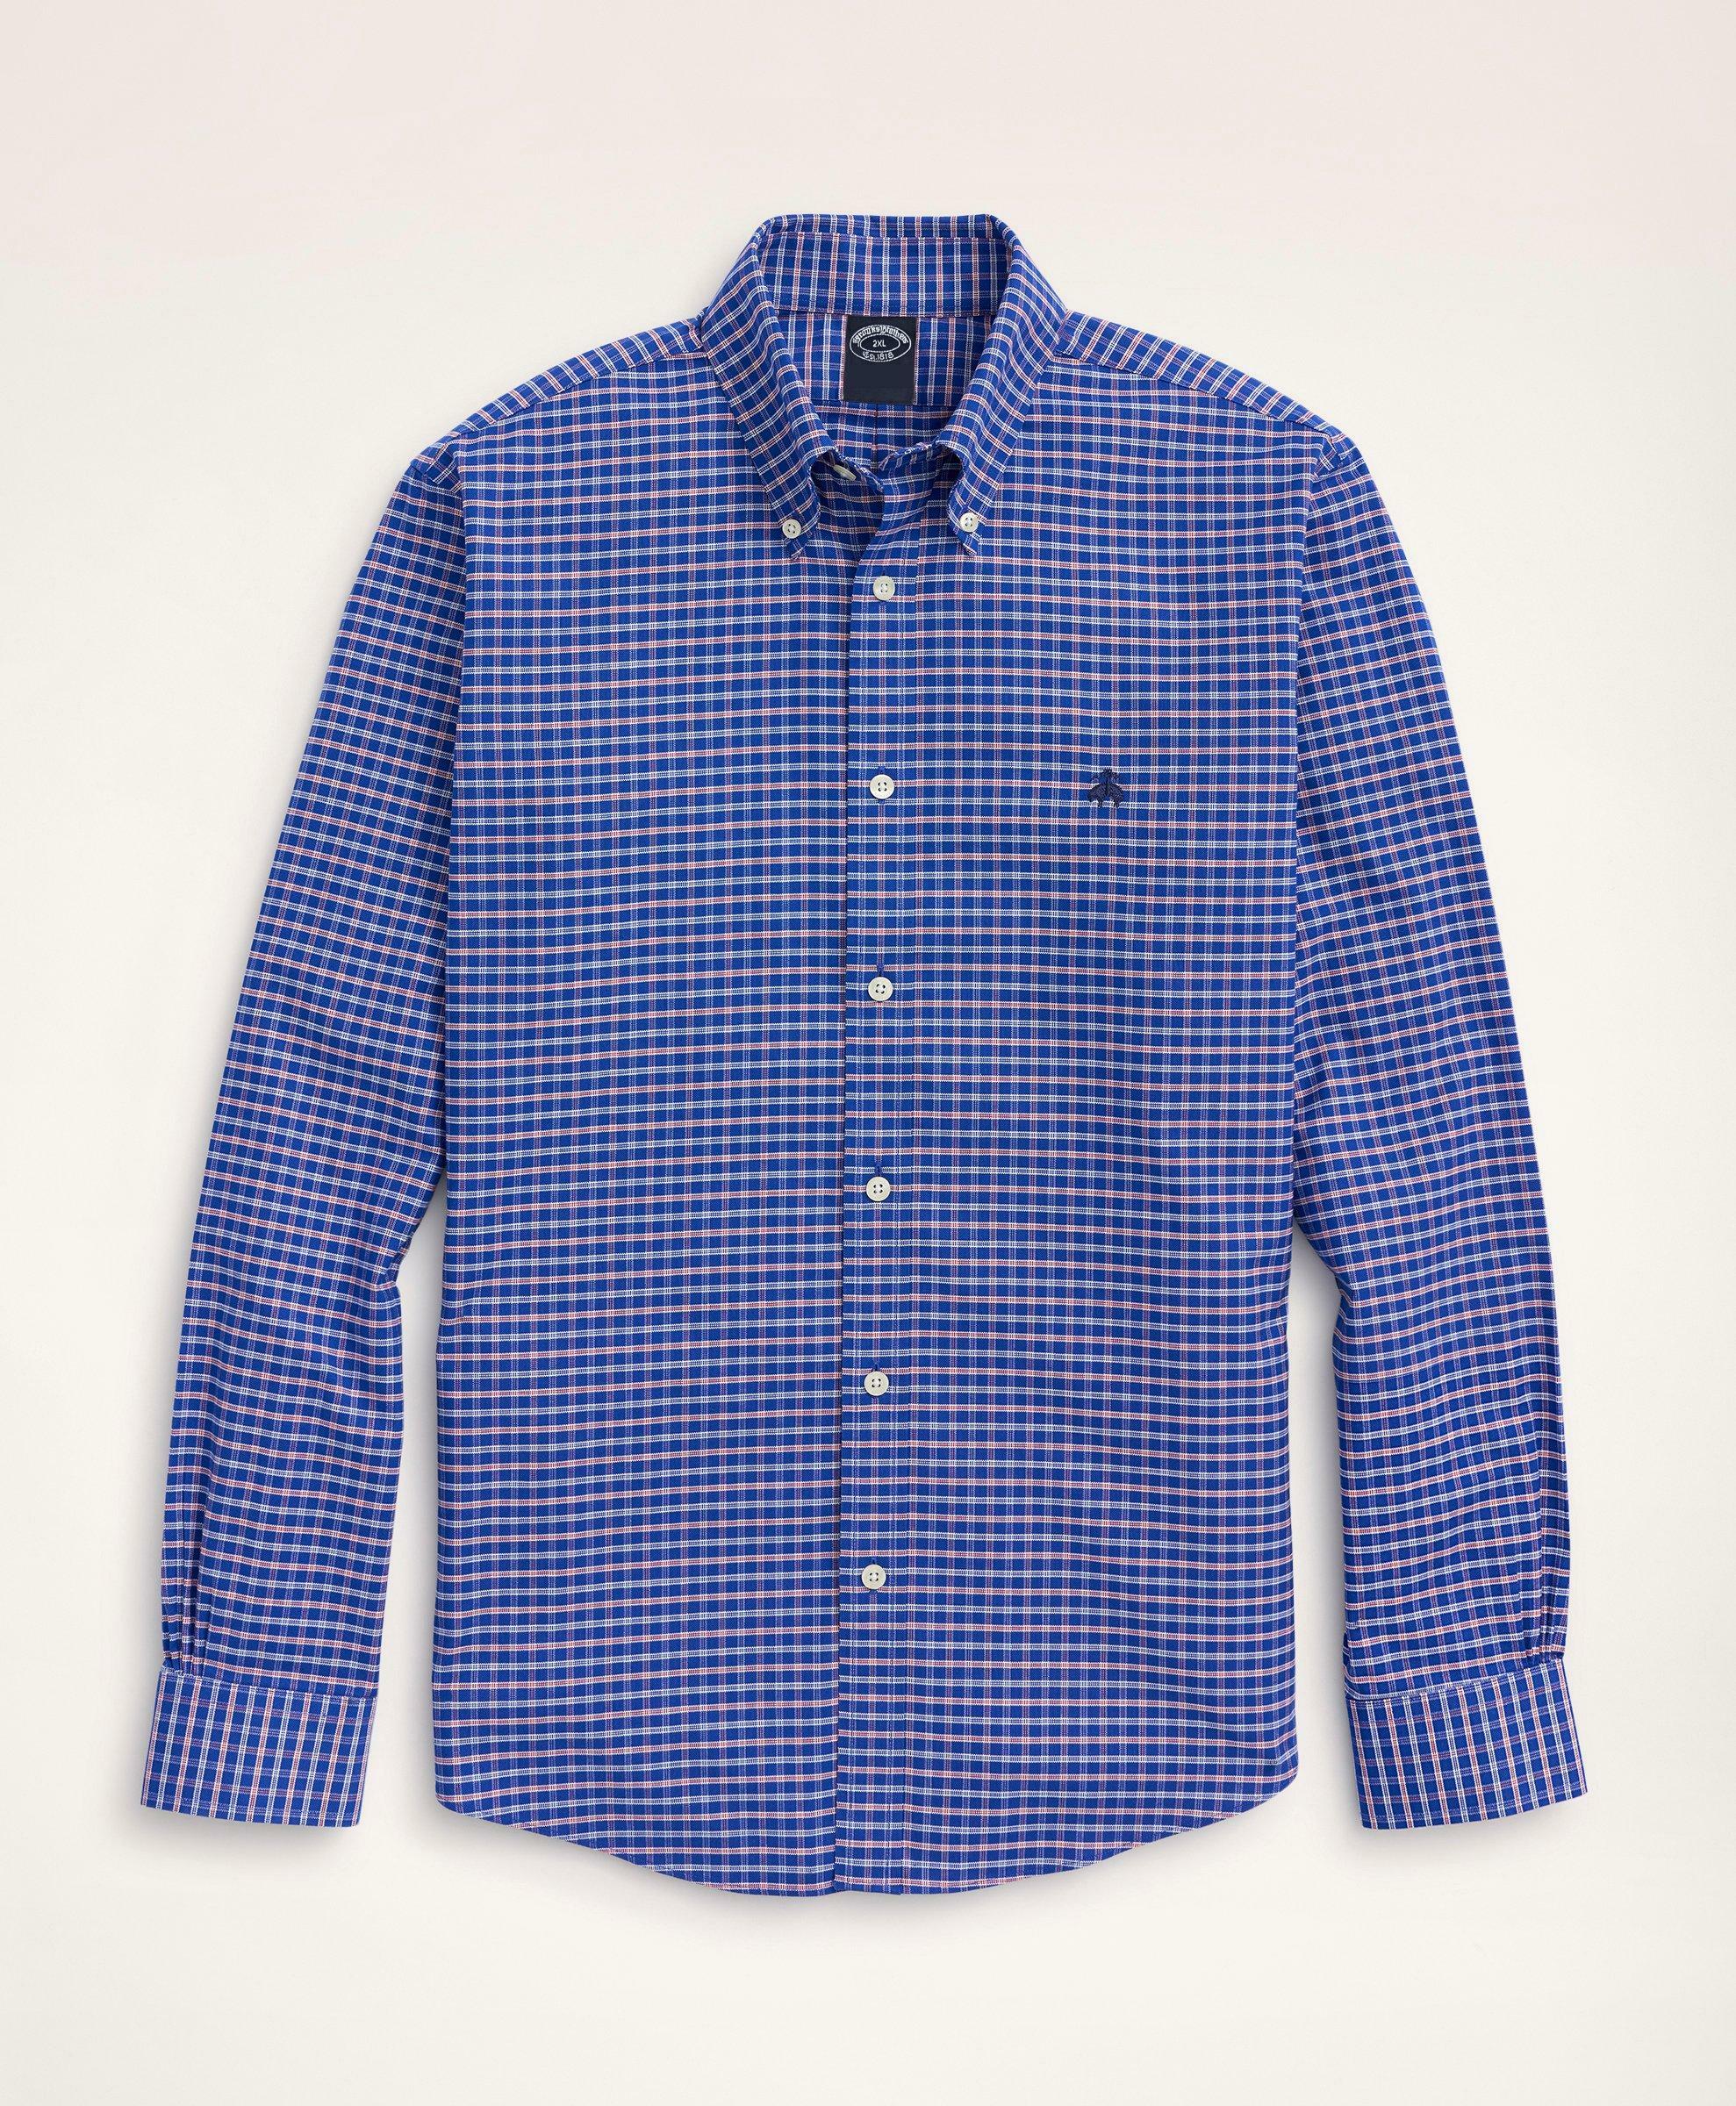 Photo: Brooks Brothers Men's Big & Tall Sport Shirt, Non-Iron Oxford Button-Down Collar Ground Check | Bright Blue